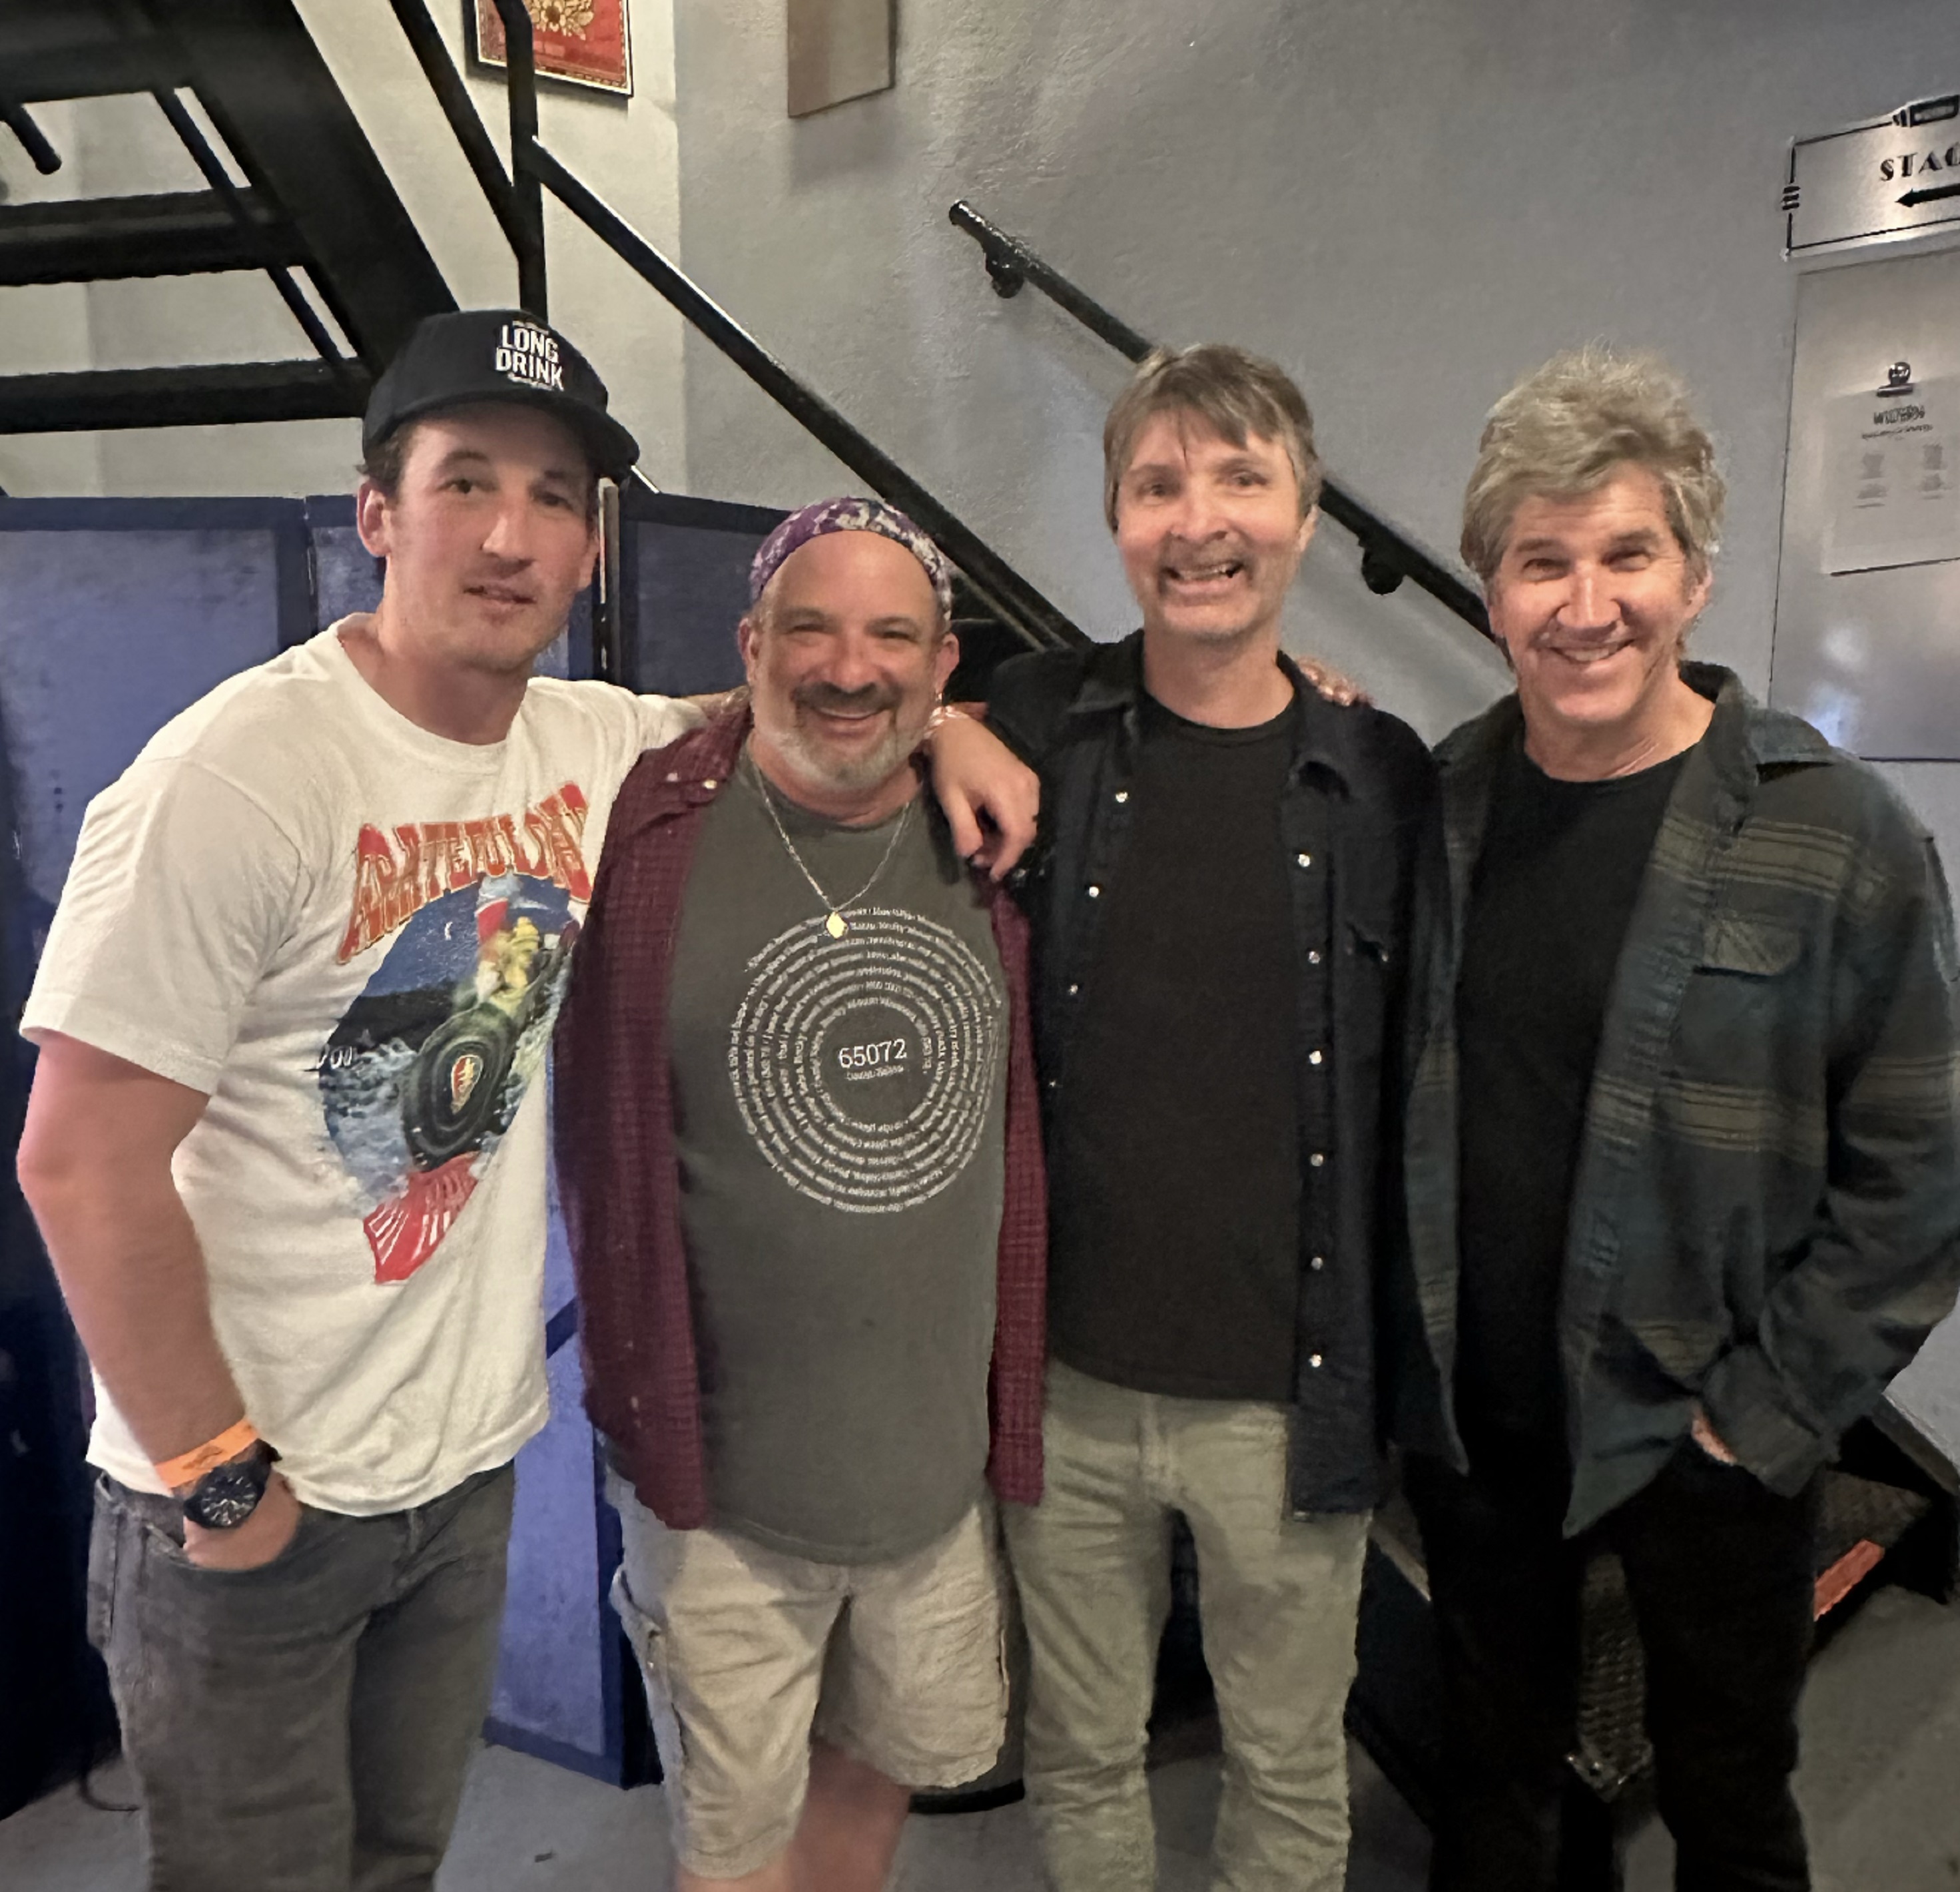 Actor Miles Teller and Drummer Chad Wackerman Join Dark Star Orchestra for Drums in LA!